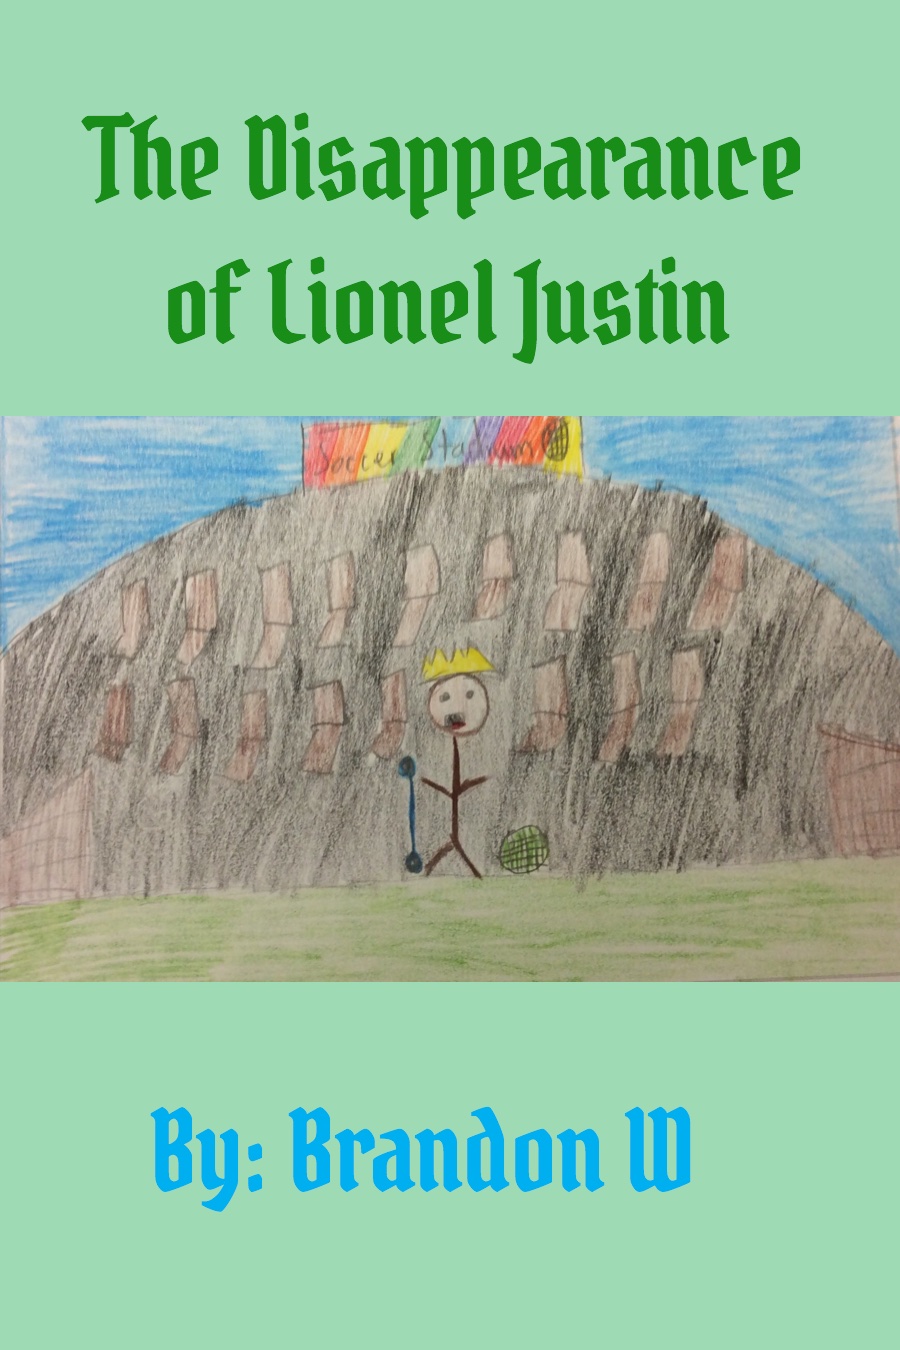 The Disappearance of Lionel Justin-1